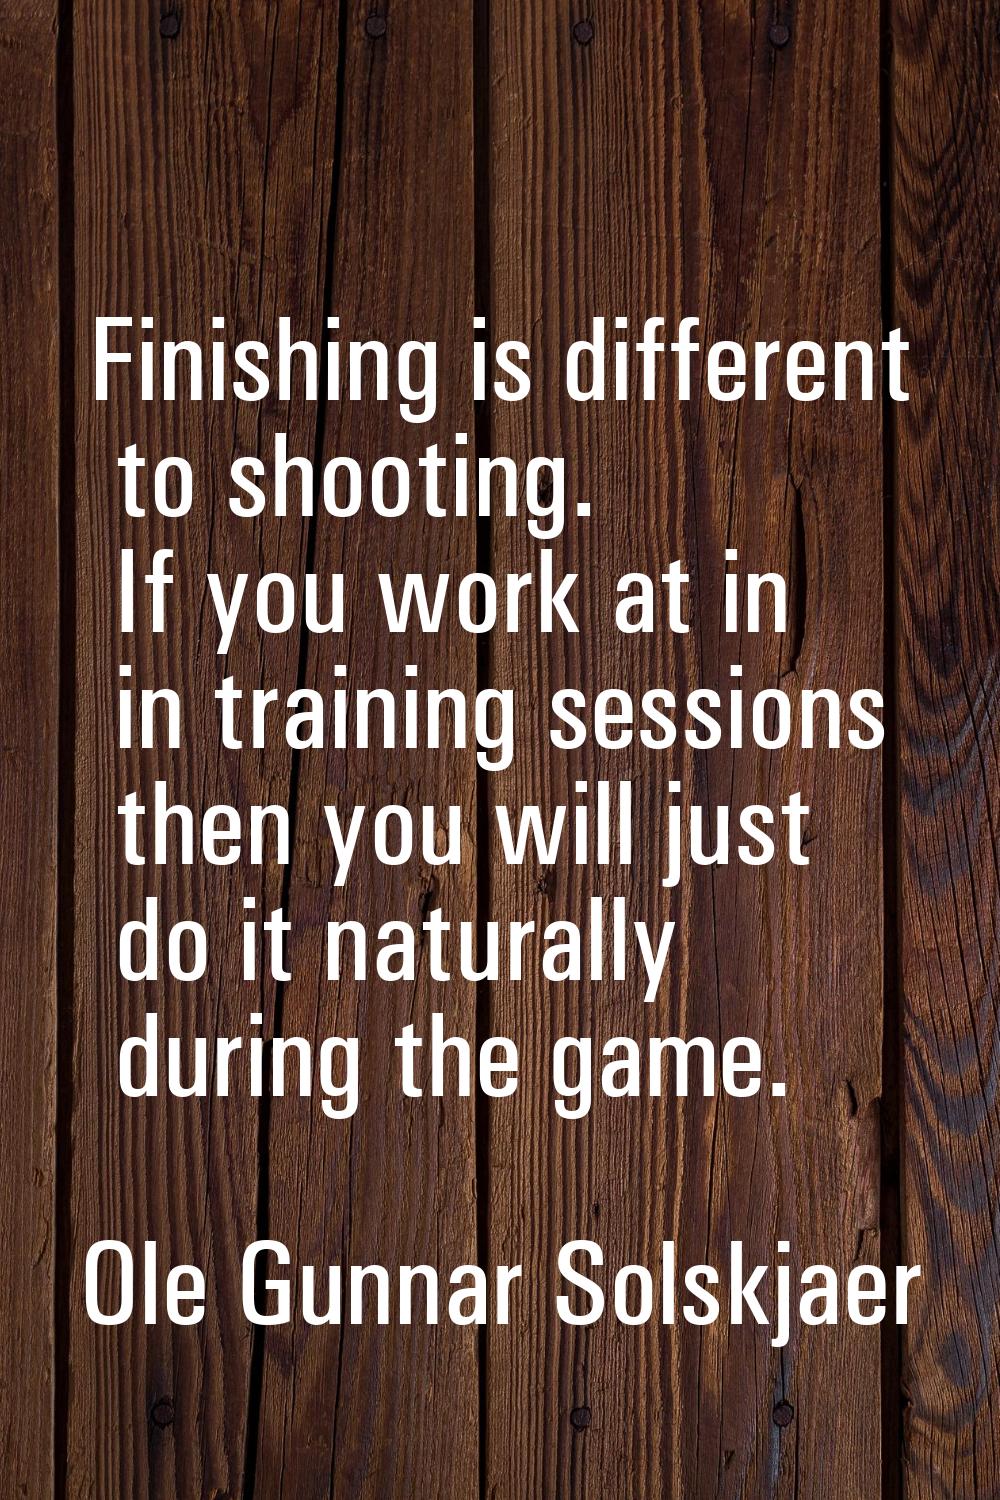 Finishing is different to shooting. If you work at in in training sessions then you will just do it